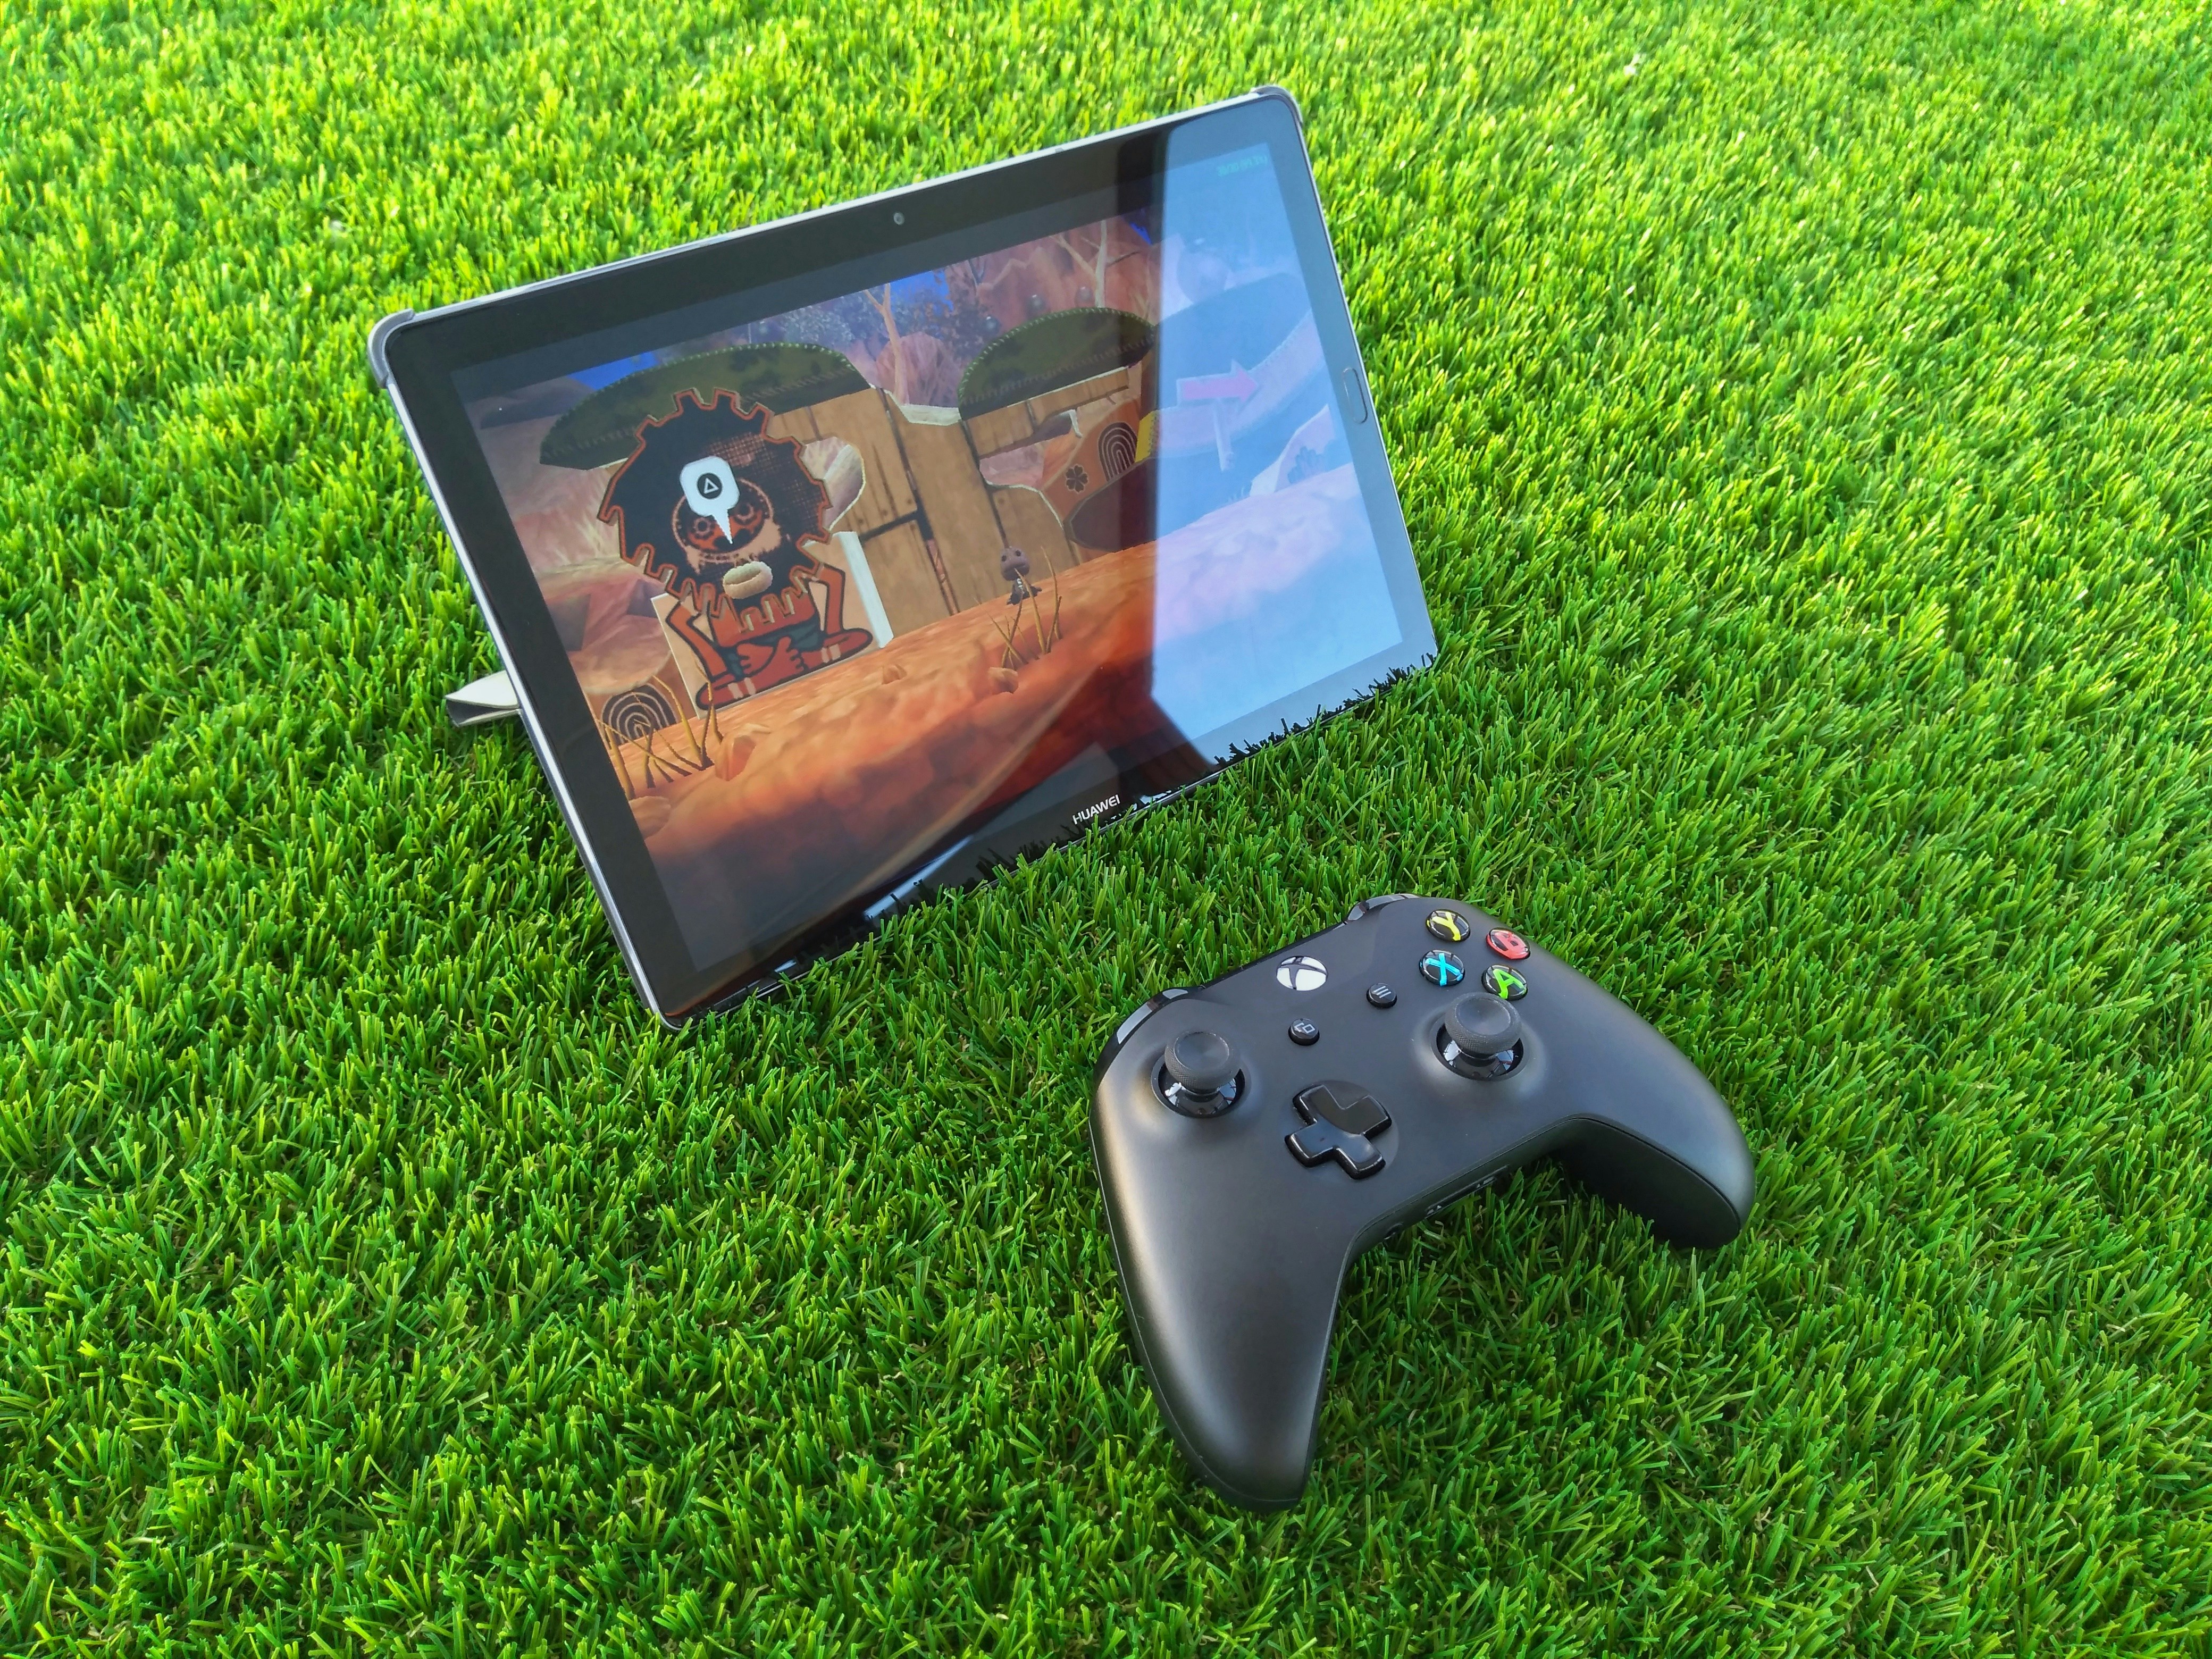 PPSSPP on an Android tablet paired with an Xbox One Controller